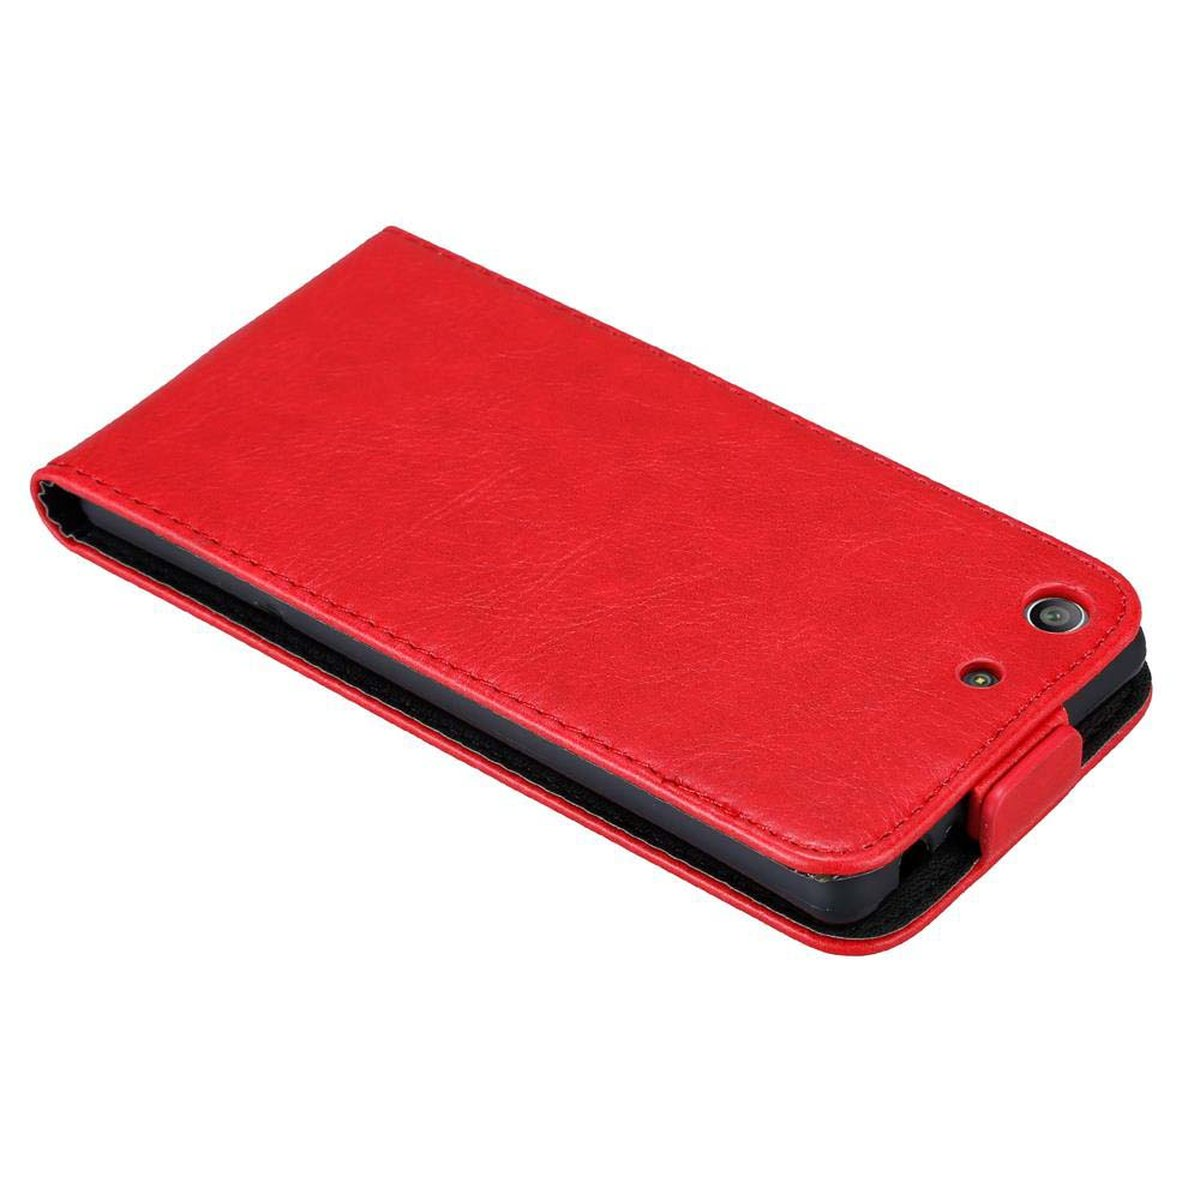 Sony, Xperia Style, APFEL Flip M5, CADORABO im Flip Hülle ROT Cover,